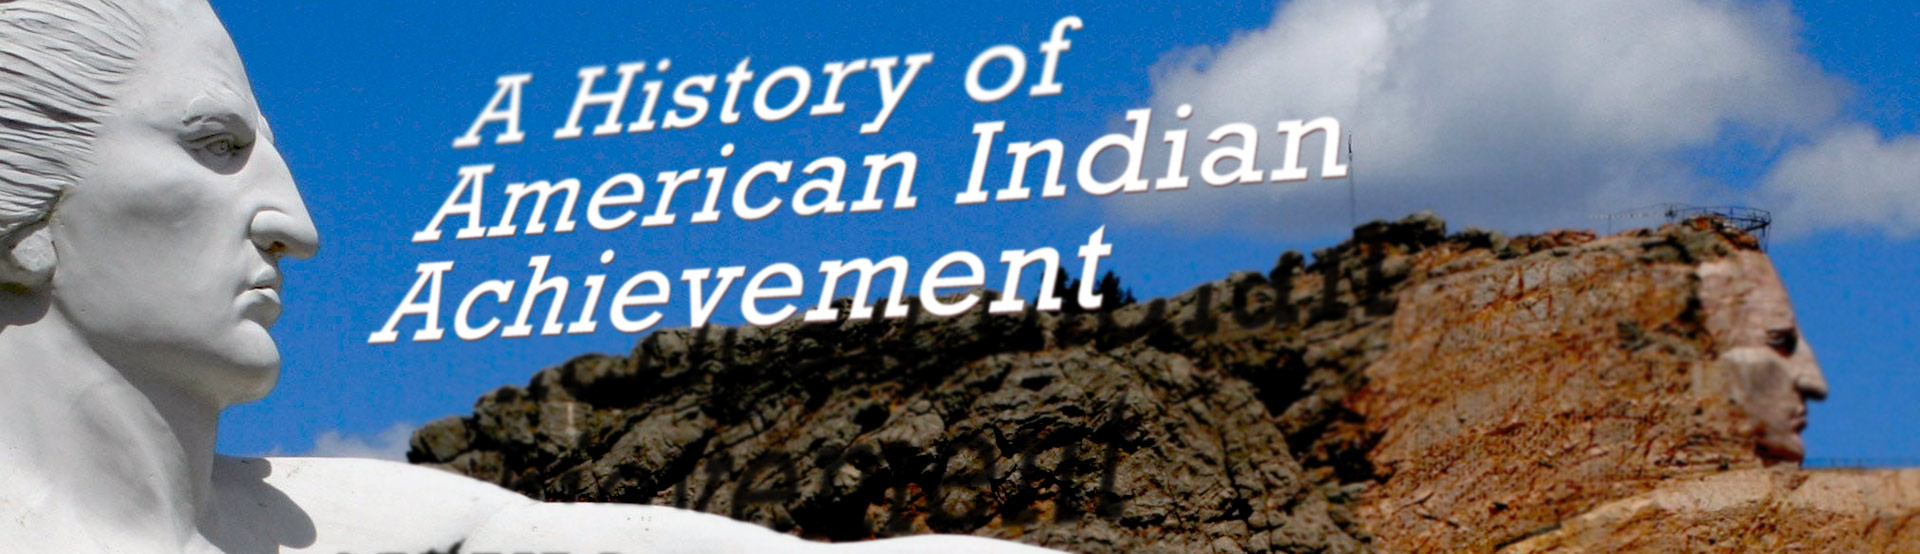 A History Of American Indian Achievement